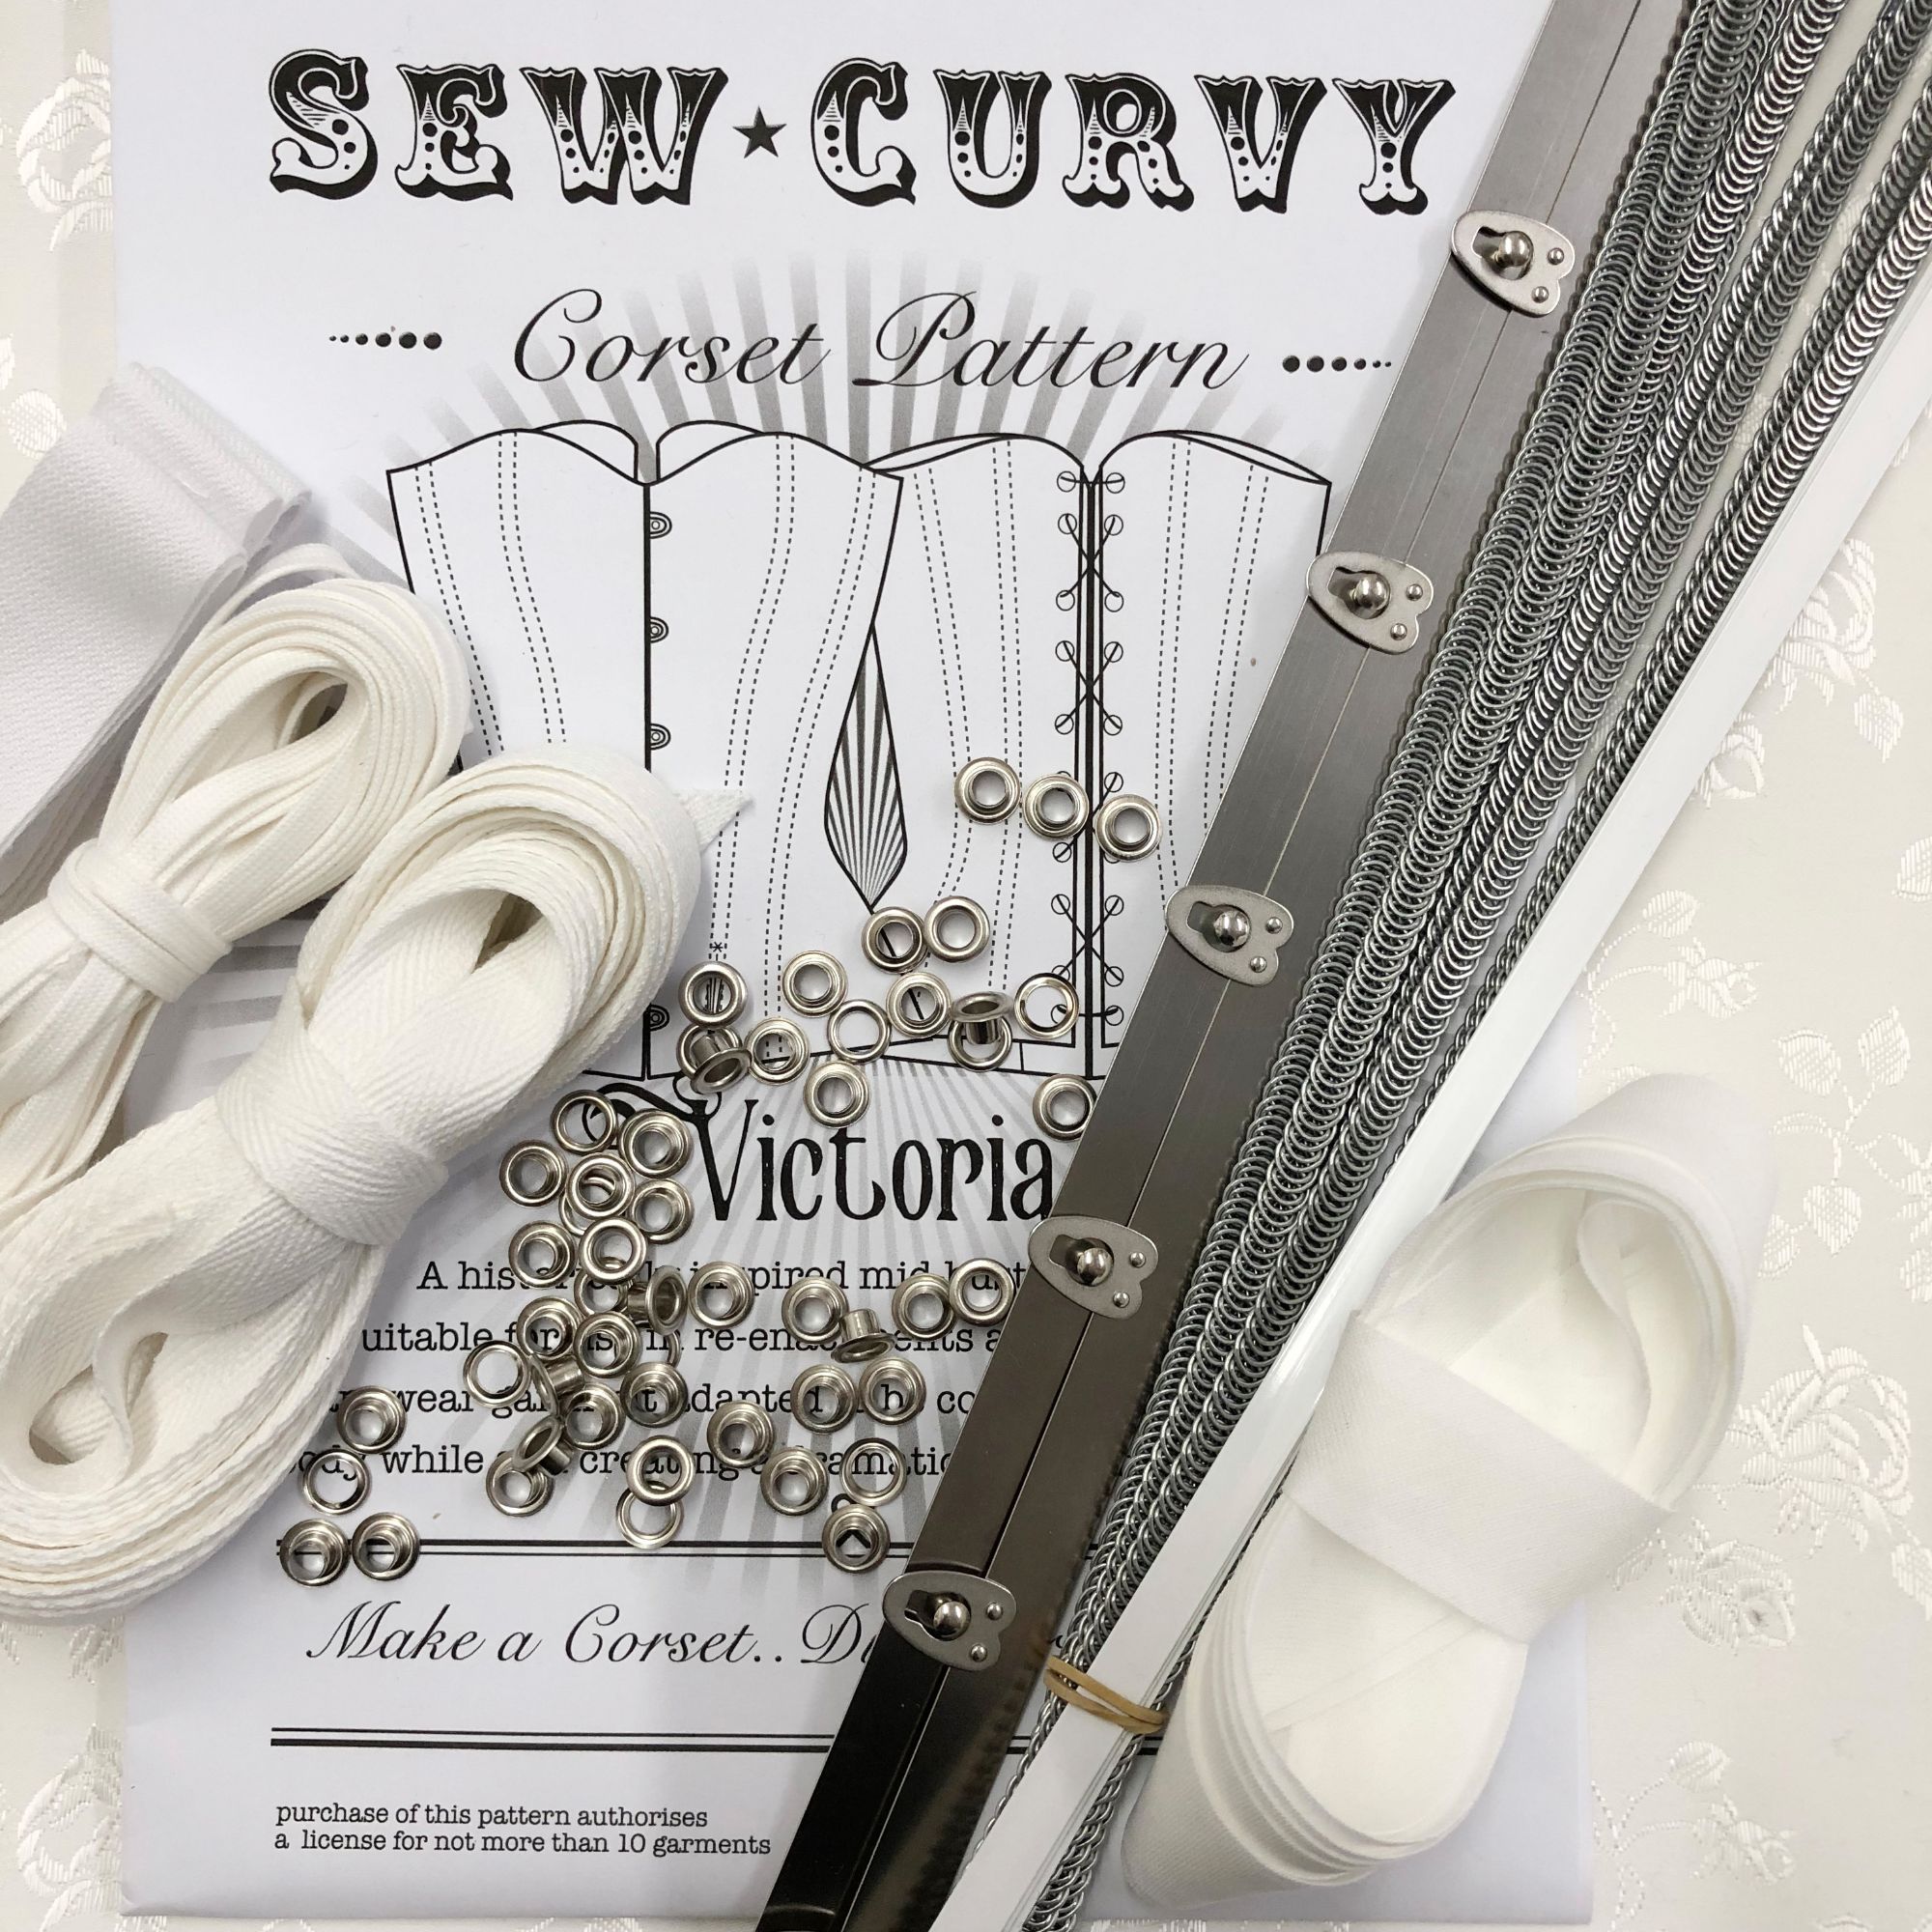 Corset making kit containing everything you need to make a corset